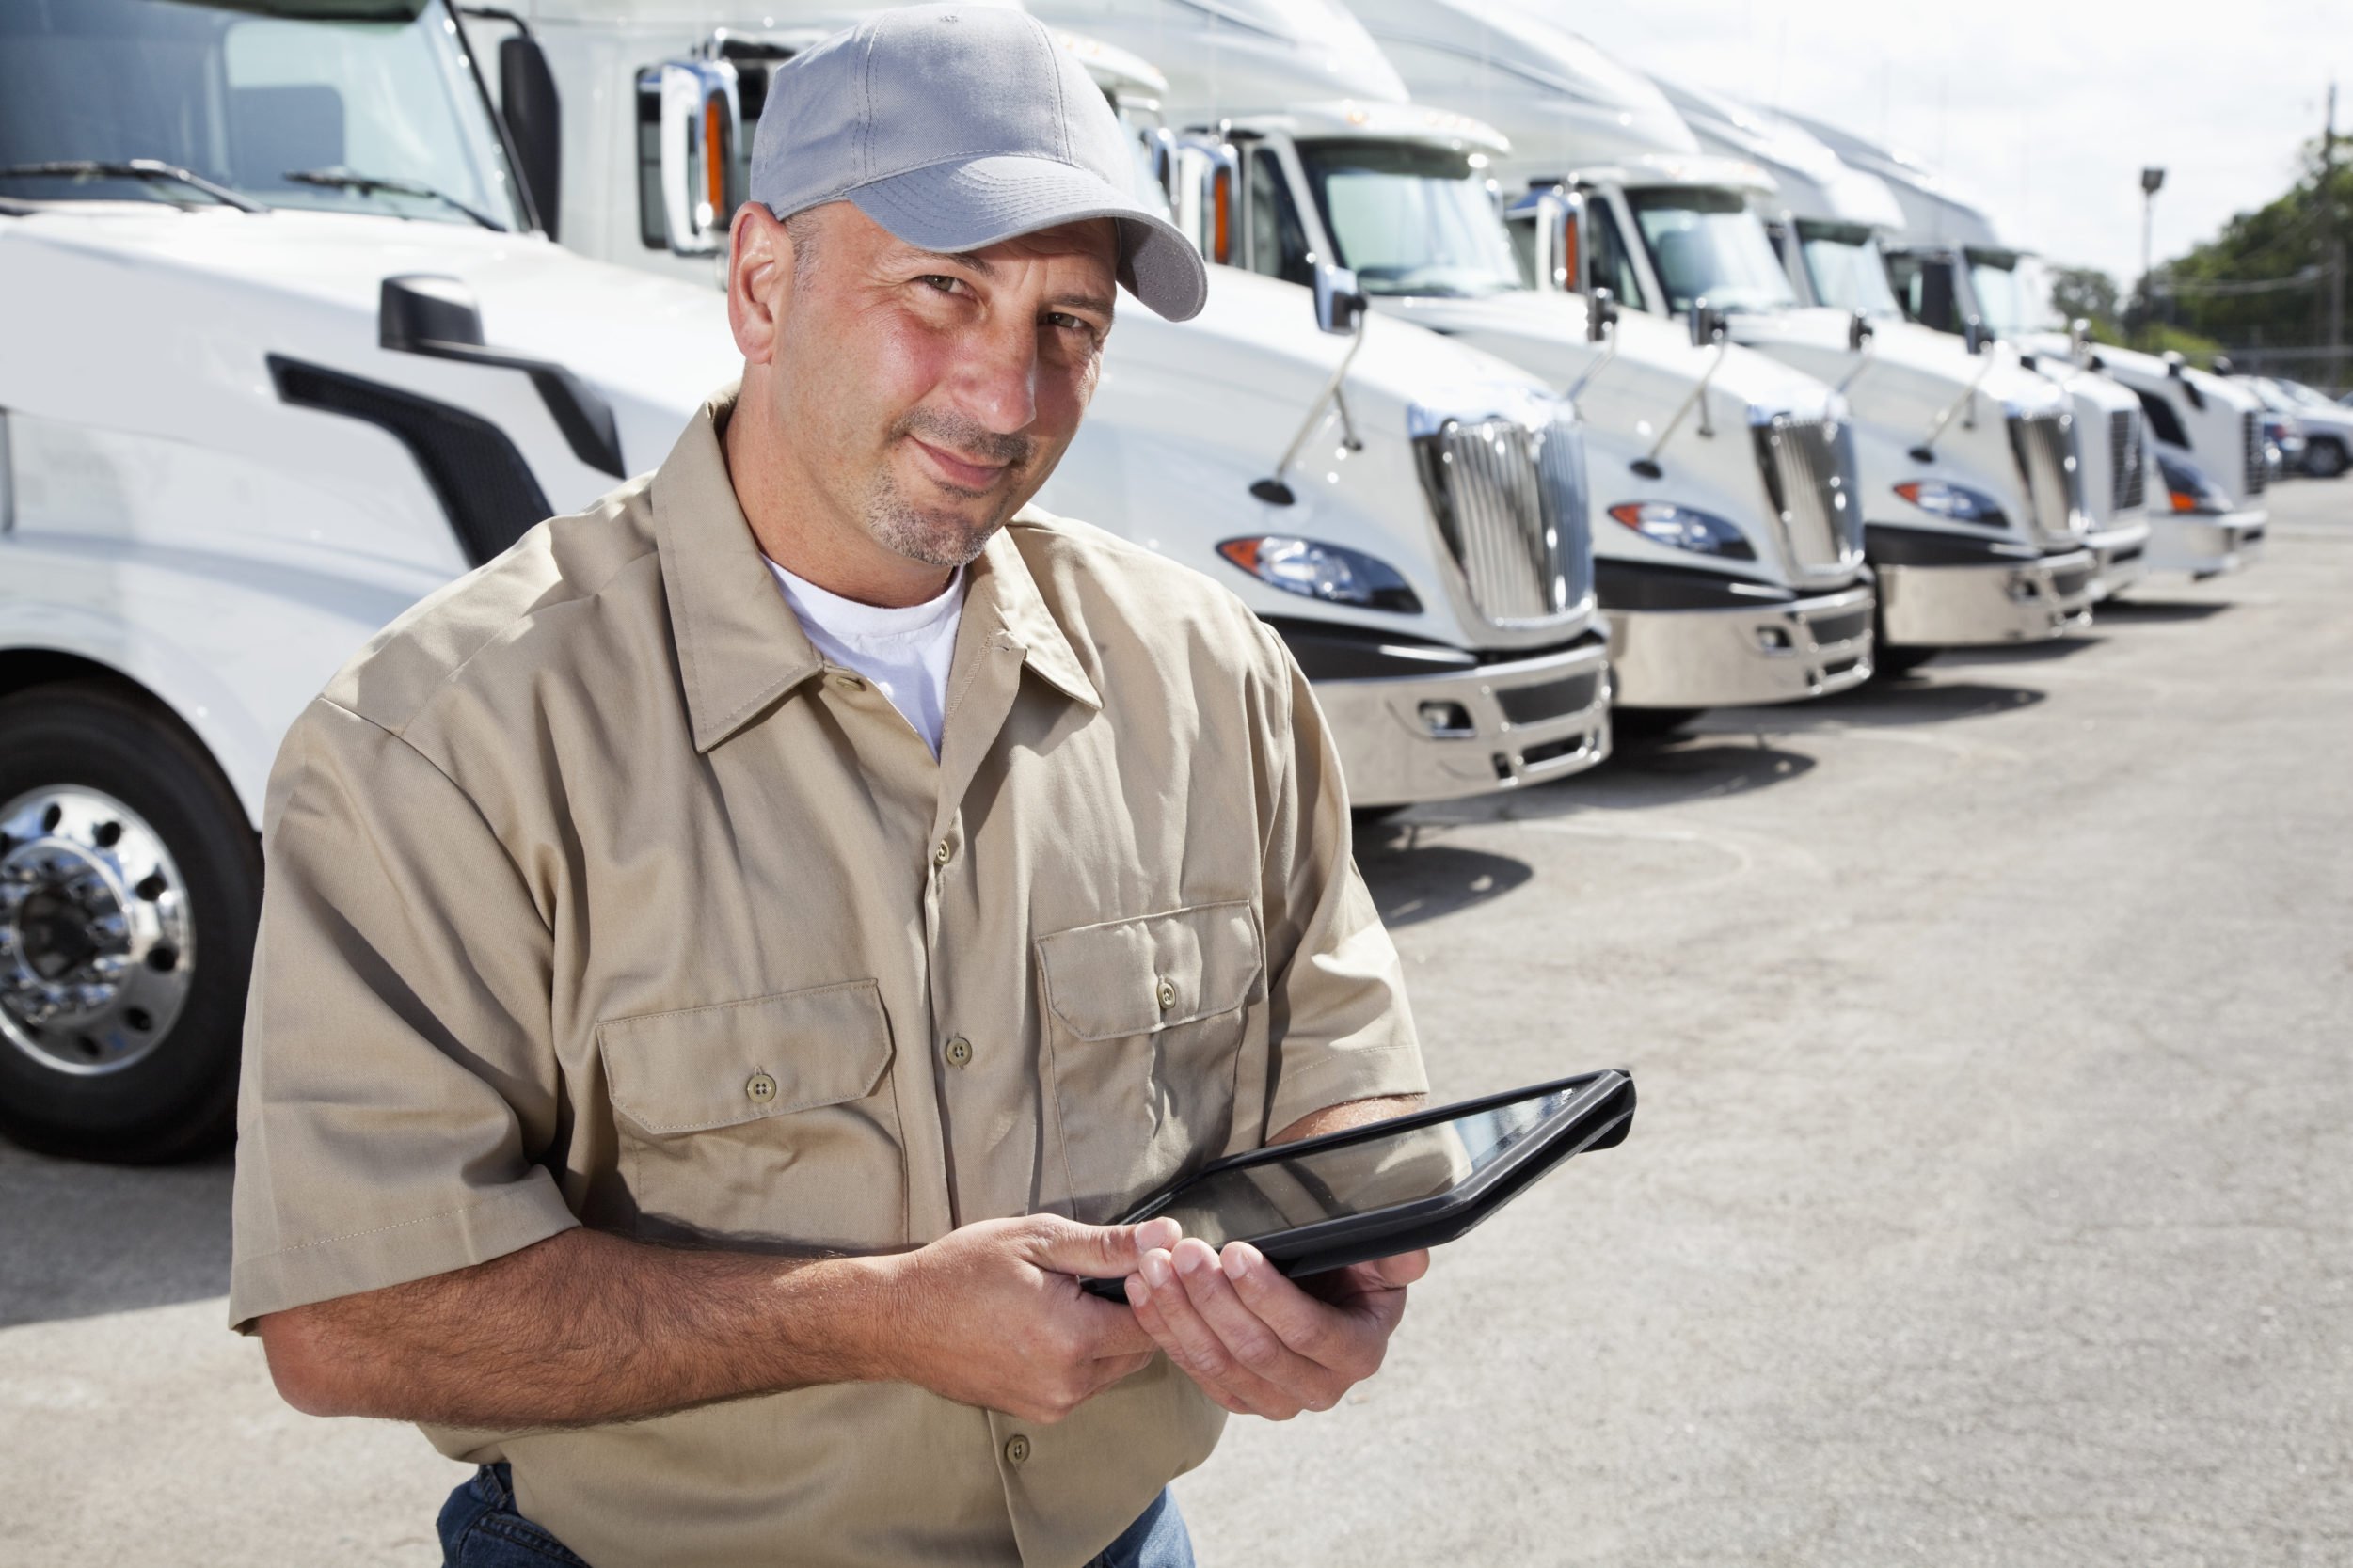 Motor carrier professional holding ELD in front of semis 